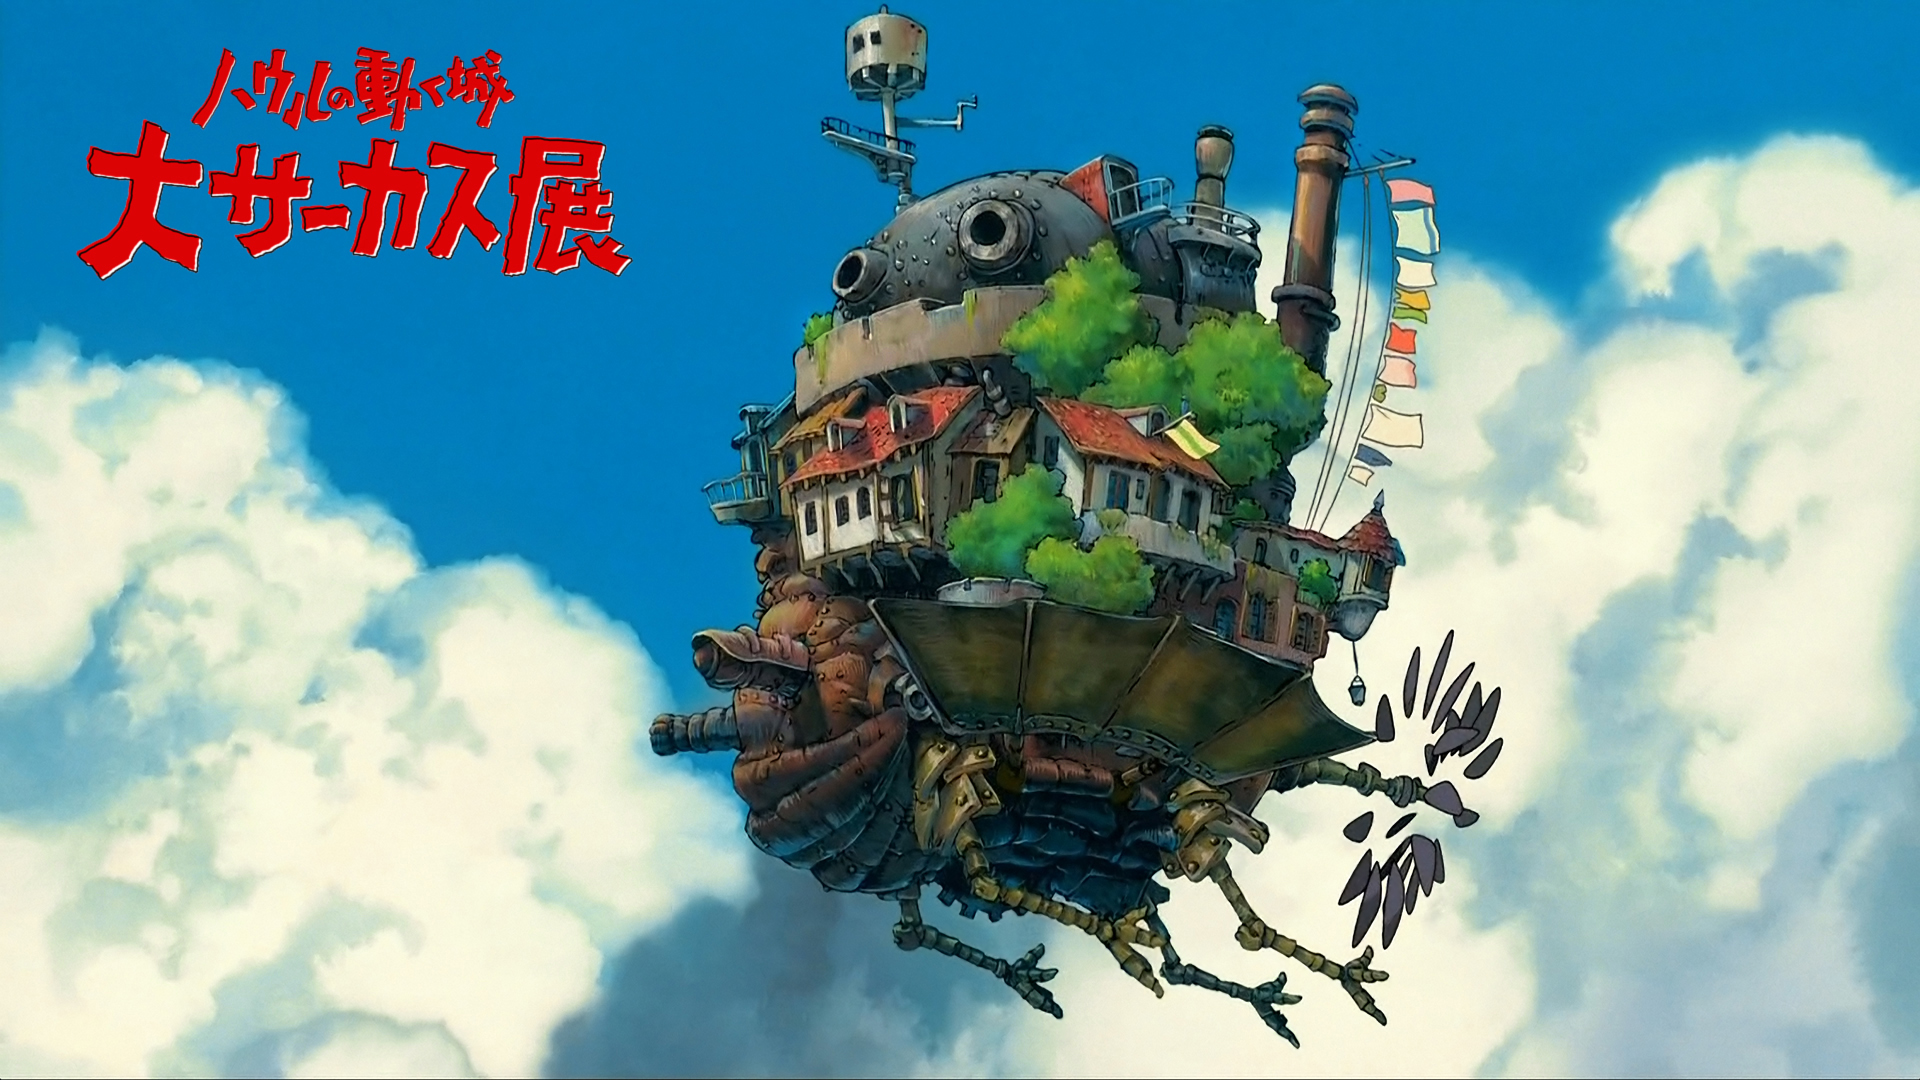 Howl's Moving Castle Background - HD Wallpaper 